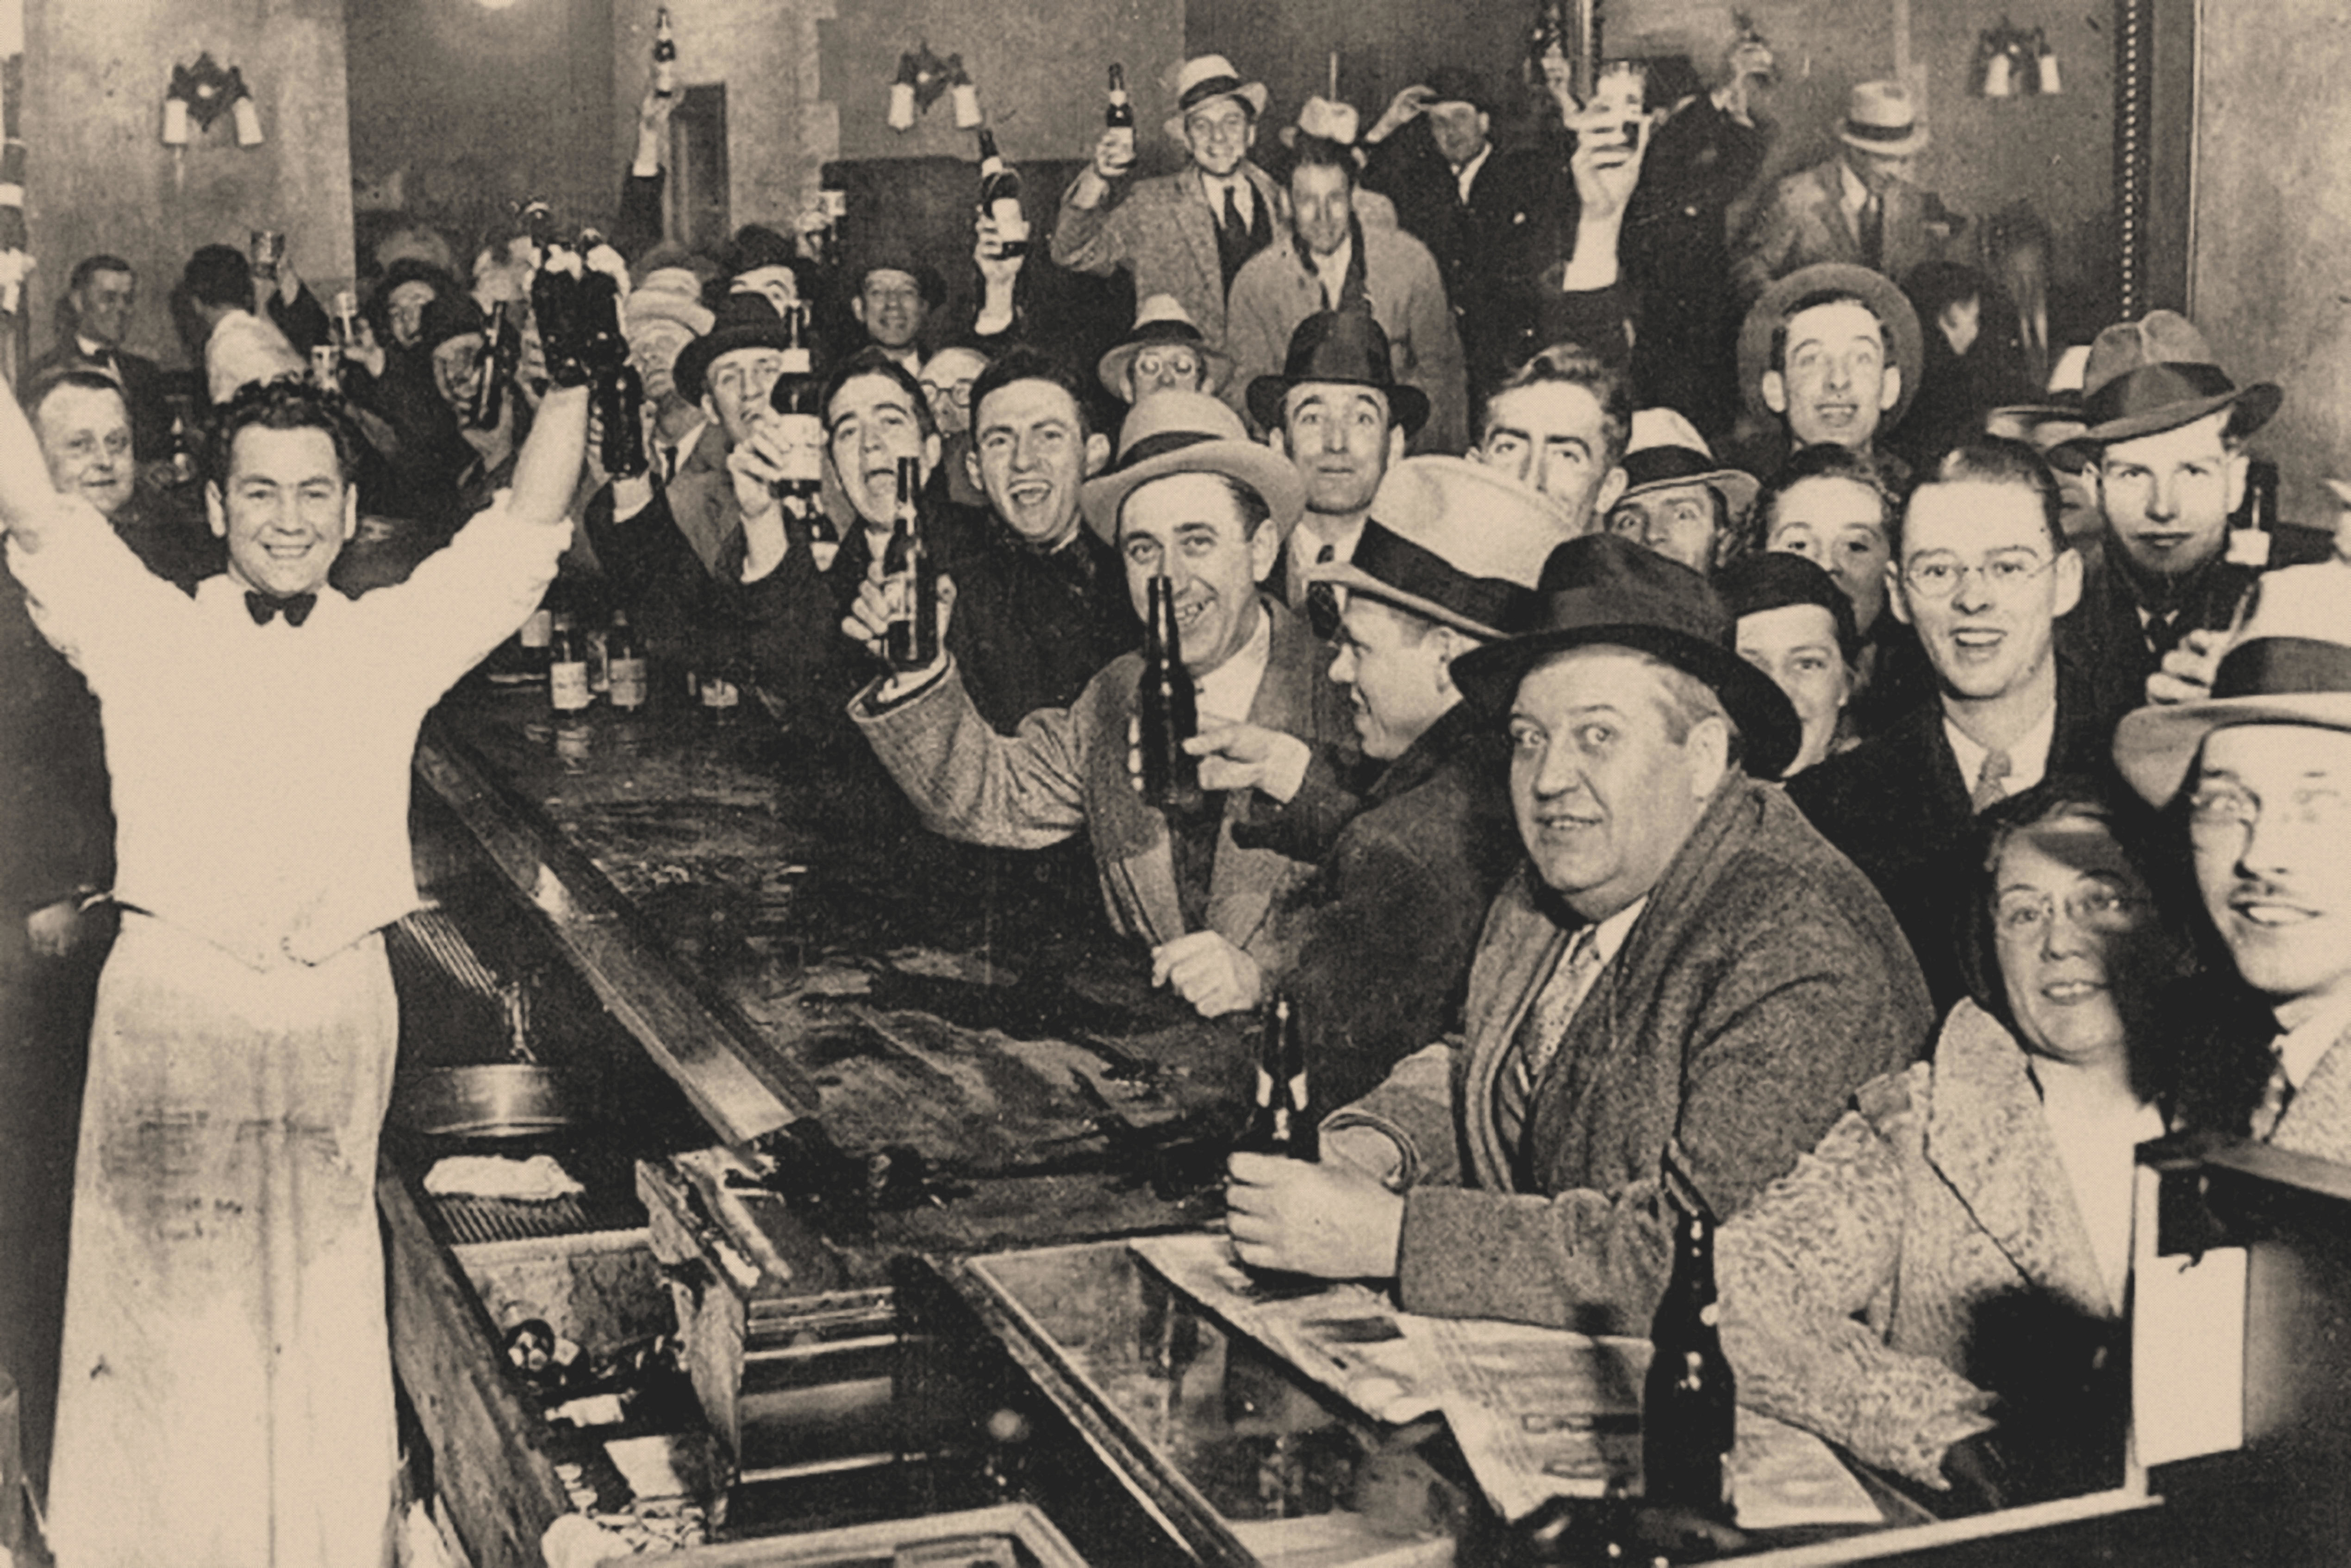 Smiling bartender with arms raised and a packed bar with smiling men, most holding beer bottles